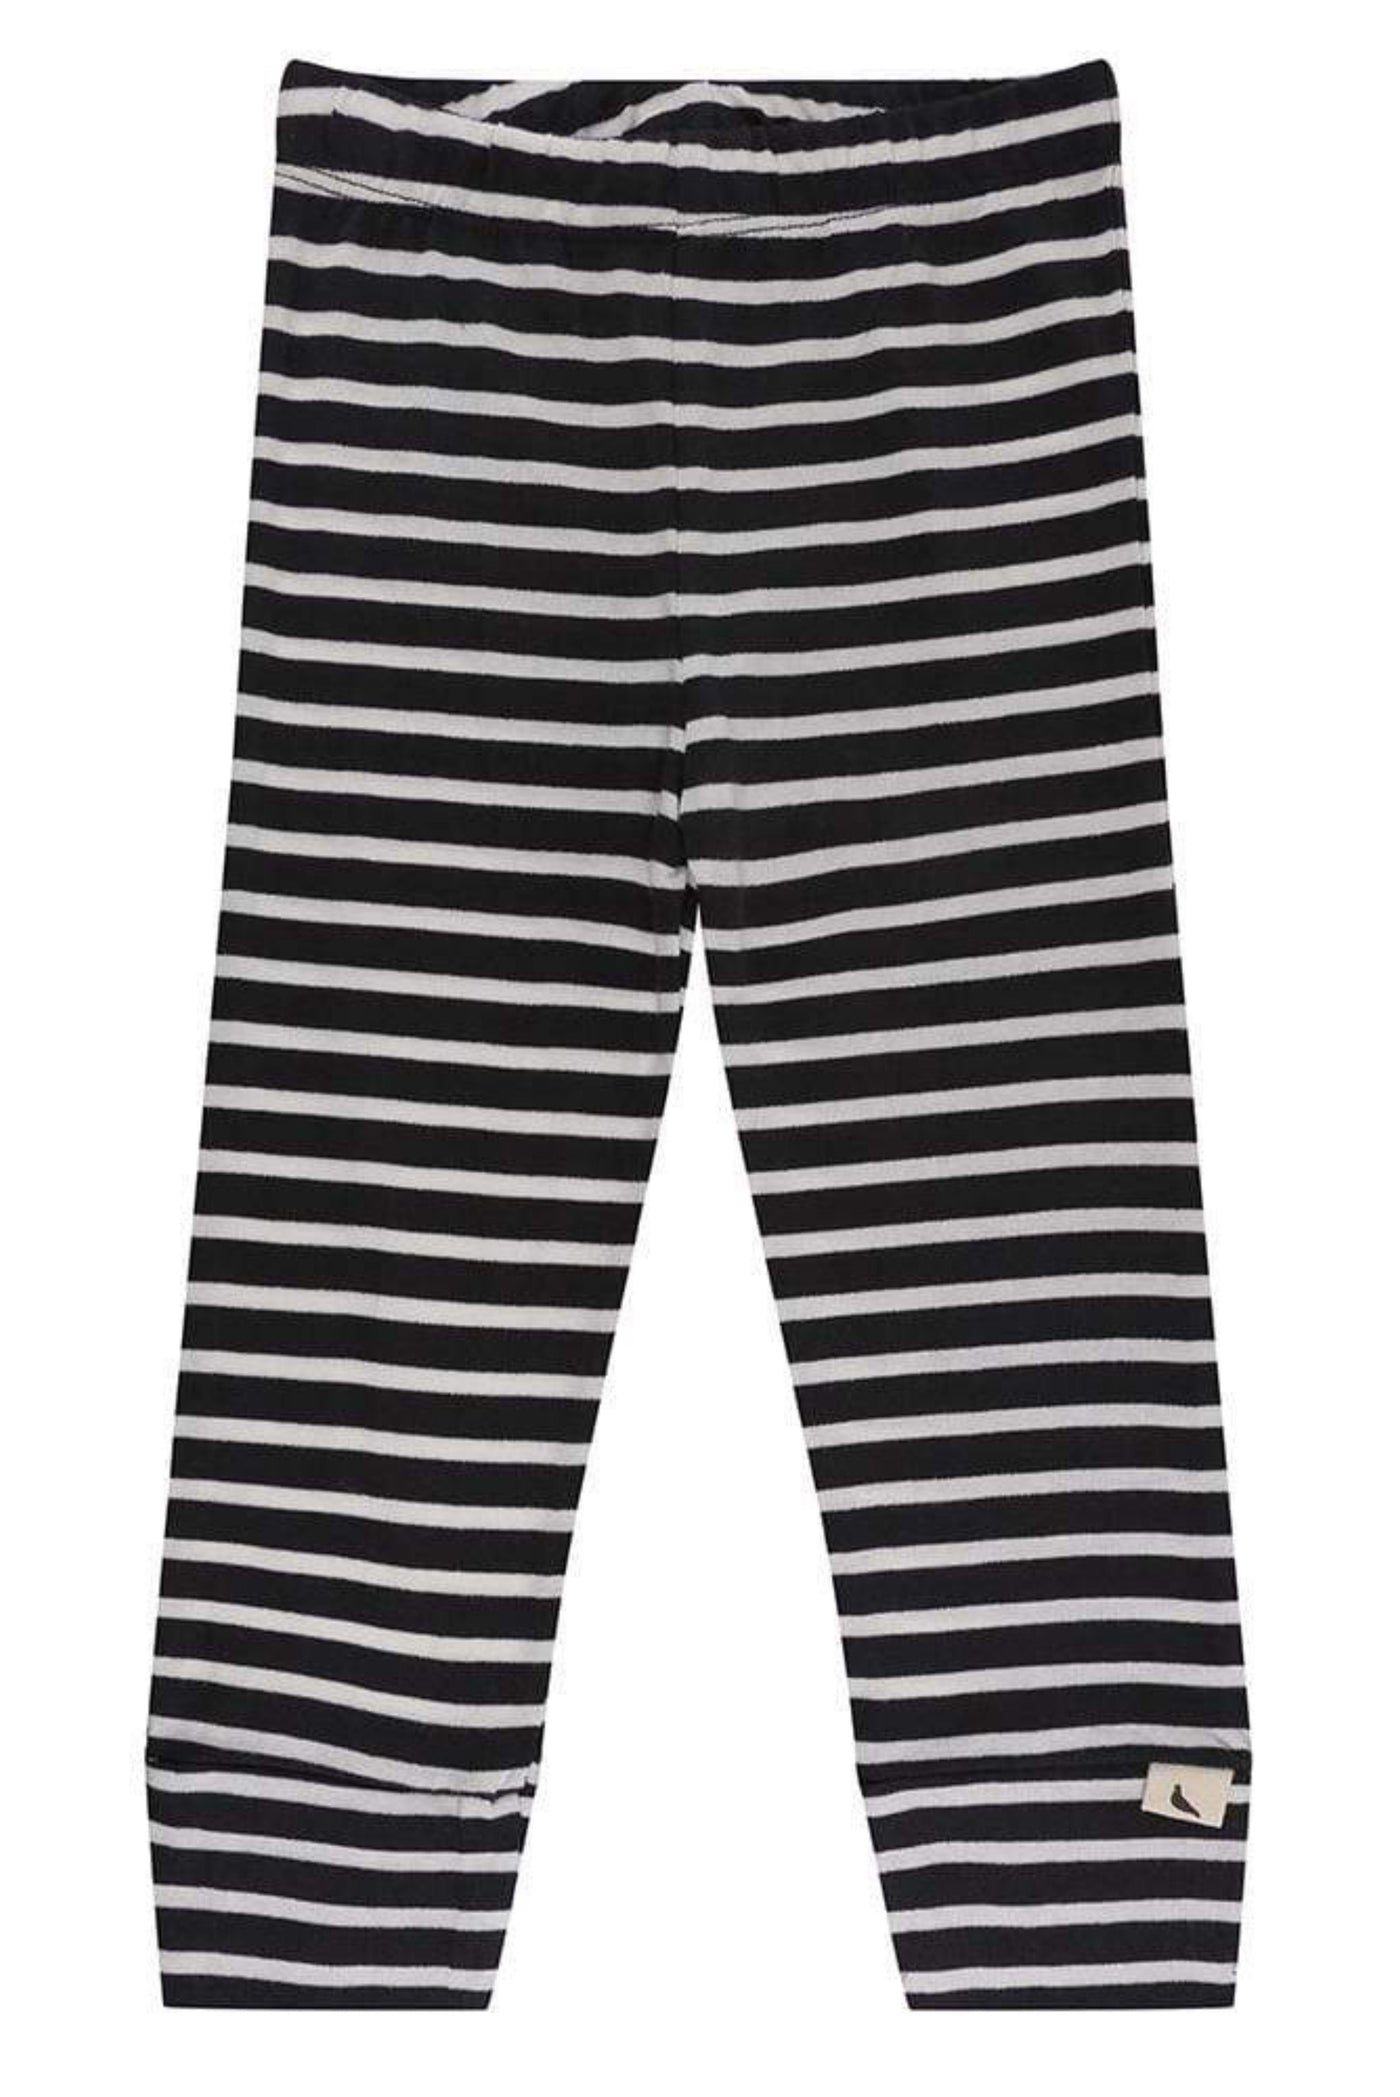 Turtledove London Summer Stripe Easy Fit Leggings-Kids-Ohh! By Gum - Shop Sustainable